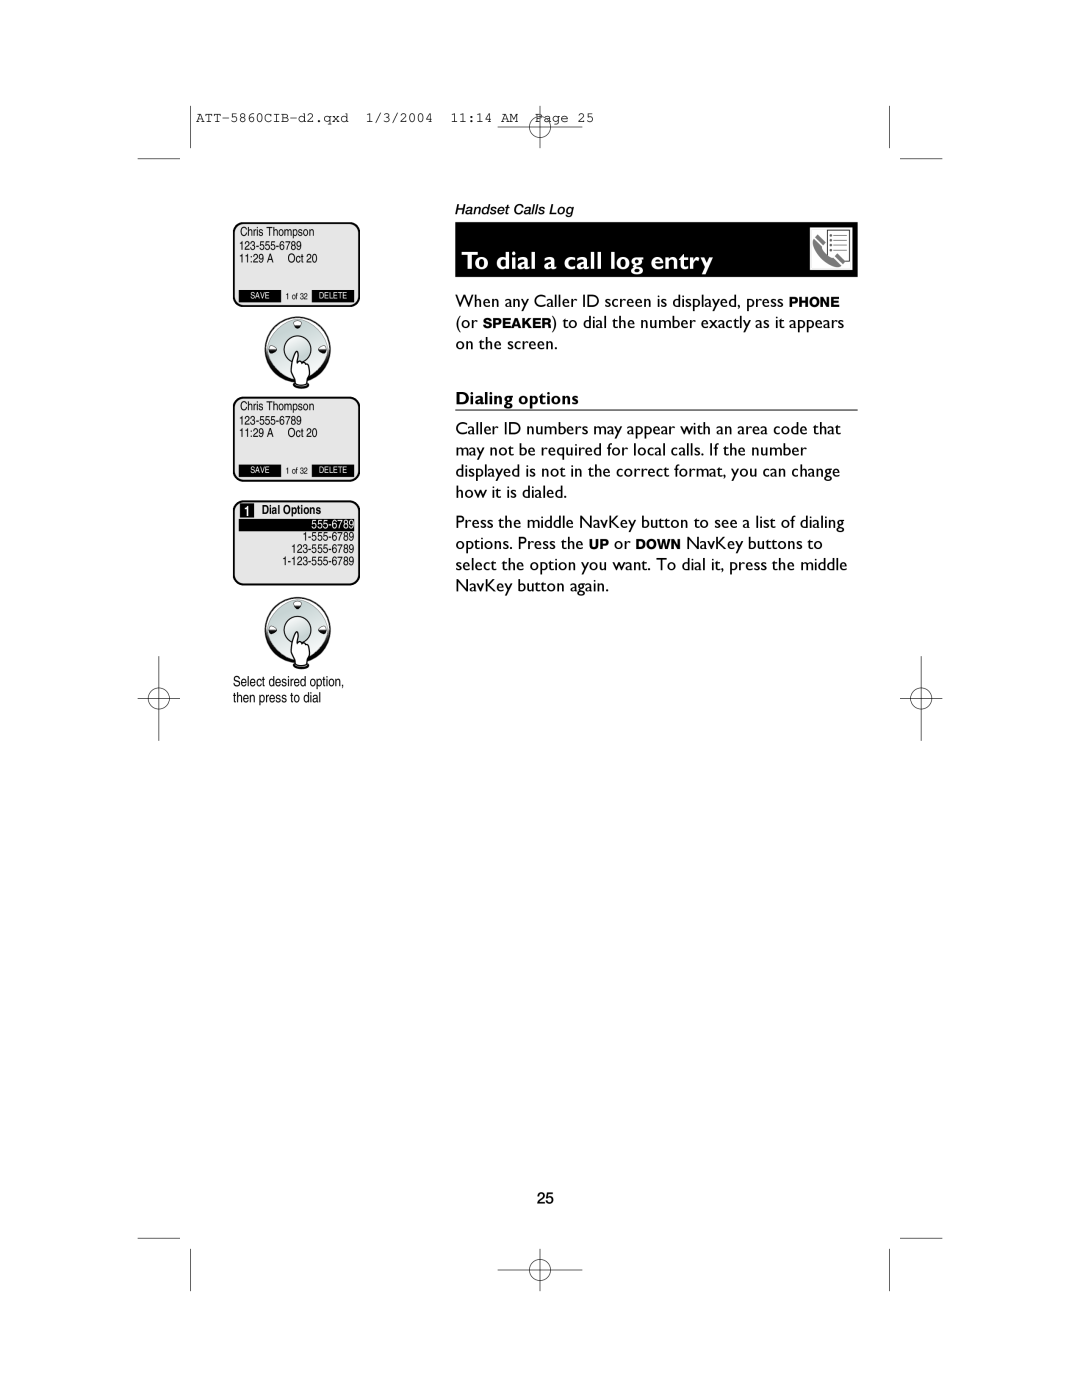 AT&T E5860 user manual To dial a call log entry, Dialing options 